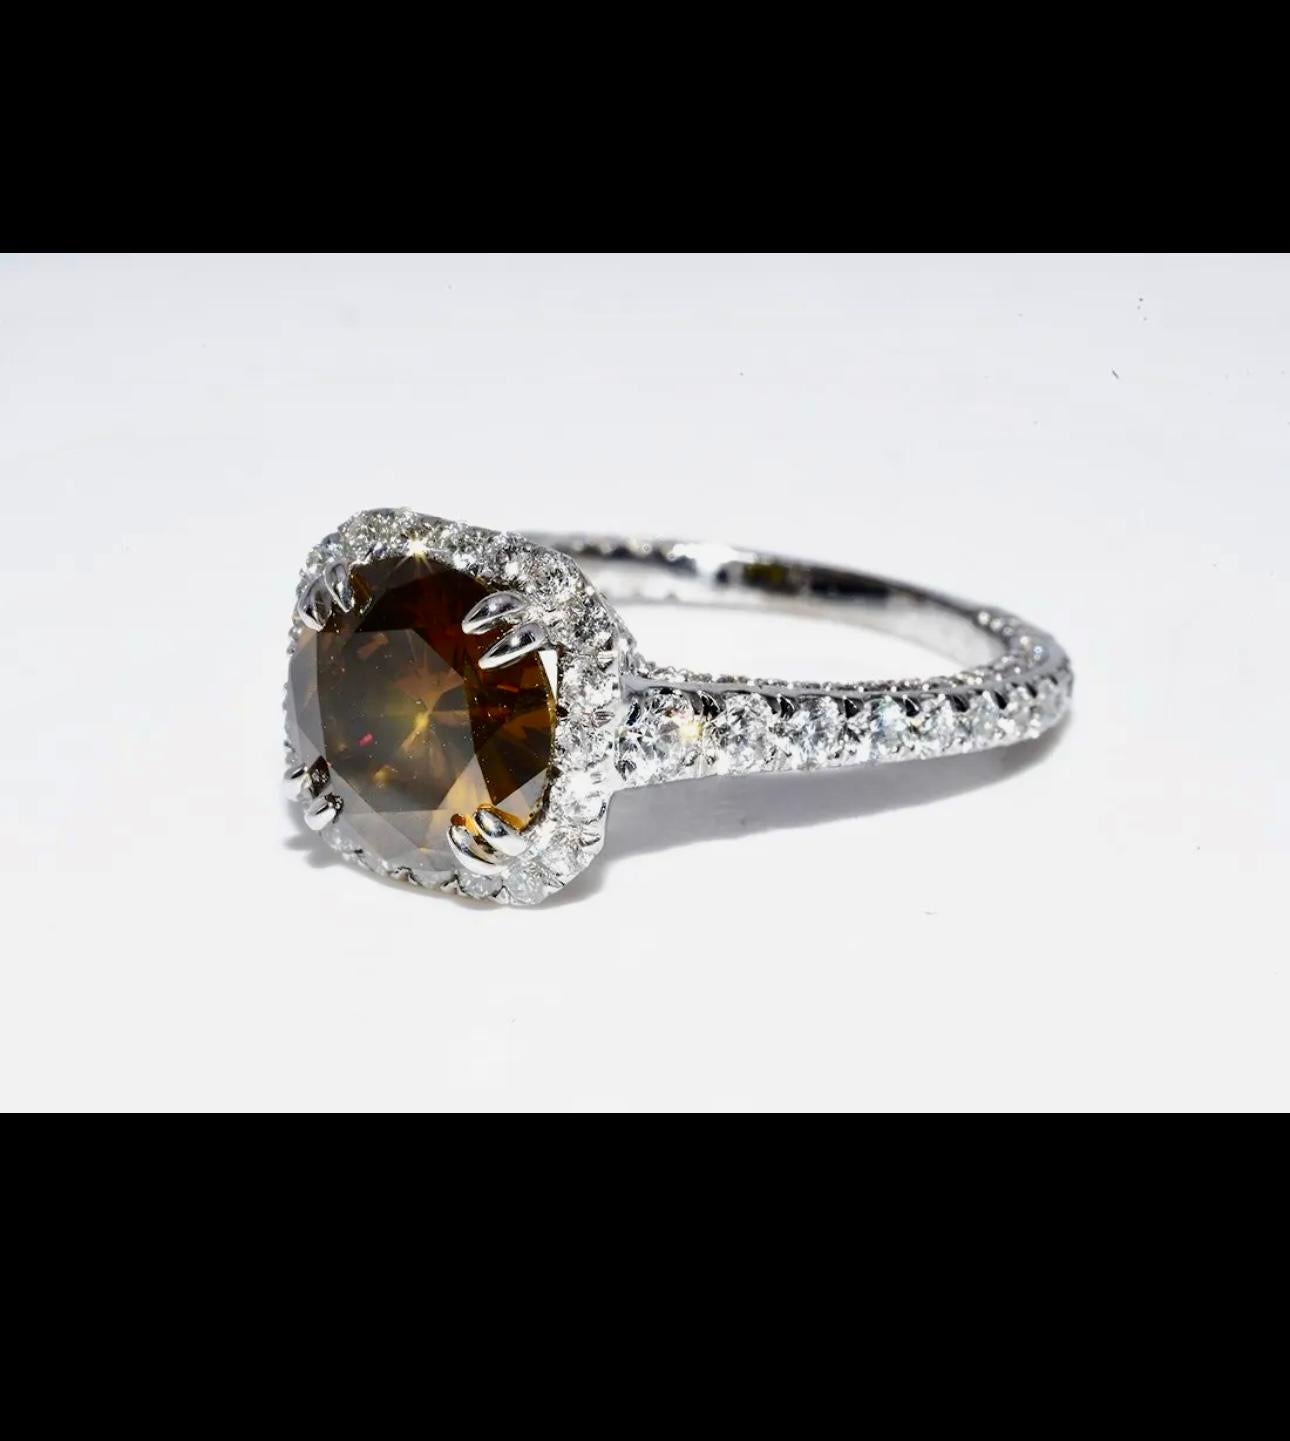 GIA Certified Fancy Color Diamond: 1.92cts   
 
Color: Fancy Dark Orange-Brown  Even       
 
Natural Side Brilliant Round Cut White Diamonds: 1.00cts   
 
Type of Metal: 14K Solid White Gold Ring
Gram Weight: 3.8 Grams
Ring Size: 6.25
Can This Ring